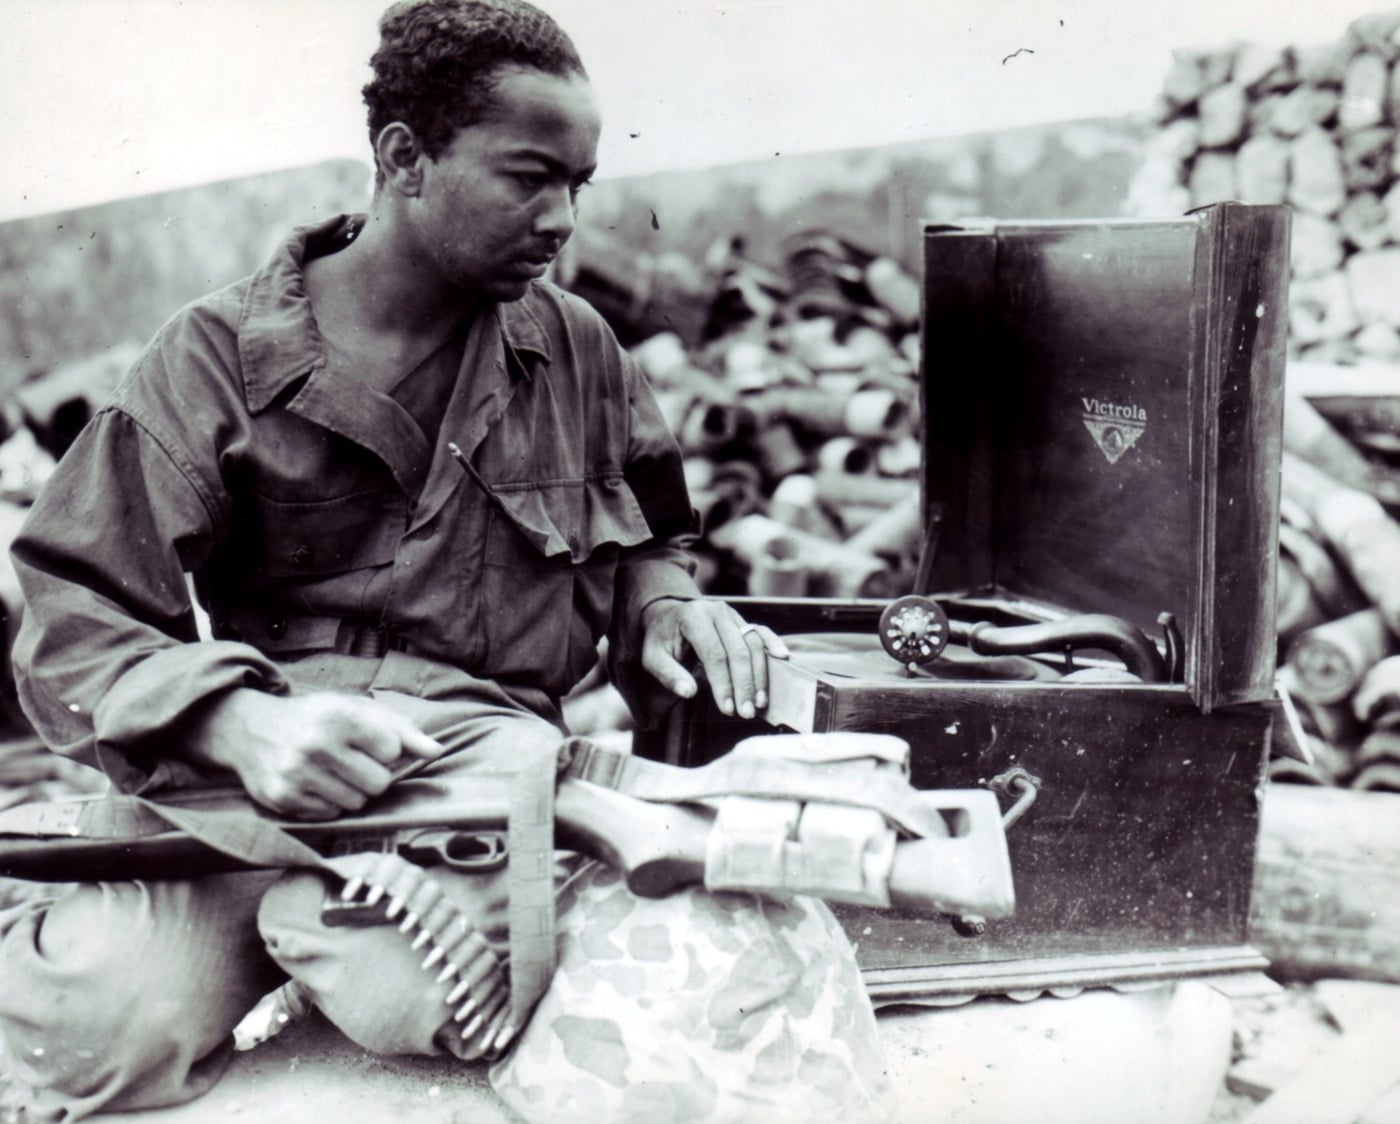 us marine with m1 carbine and victrola record player on okinawa